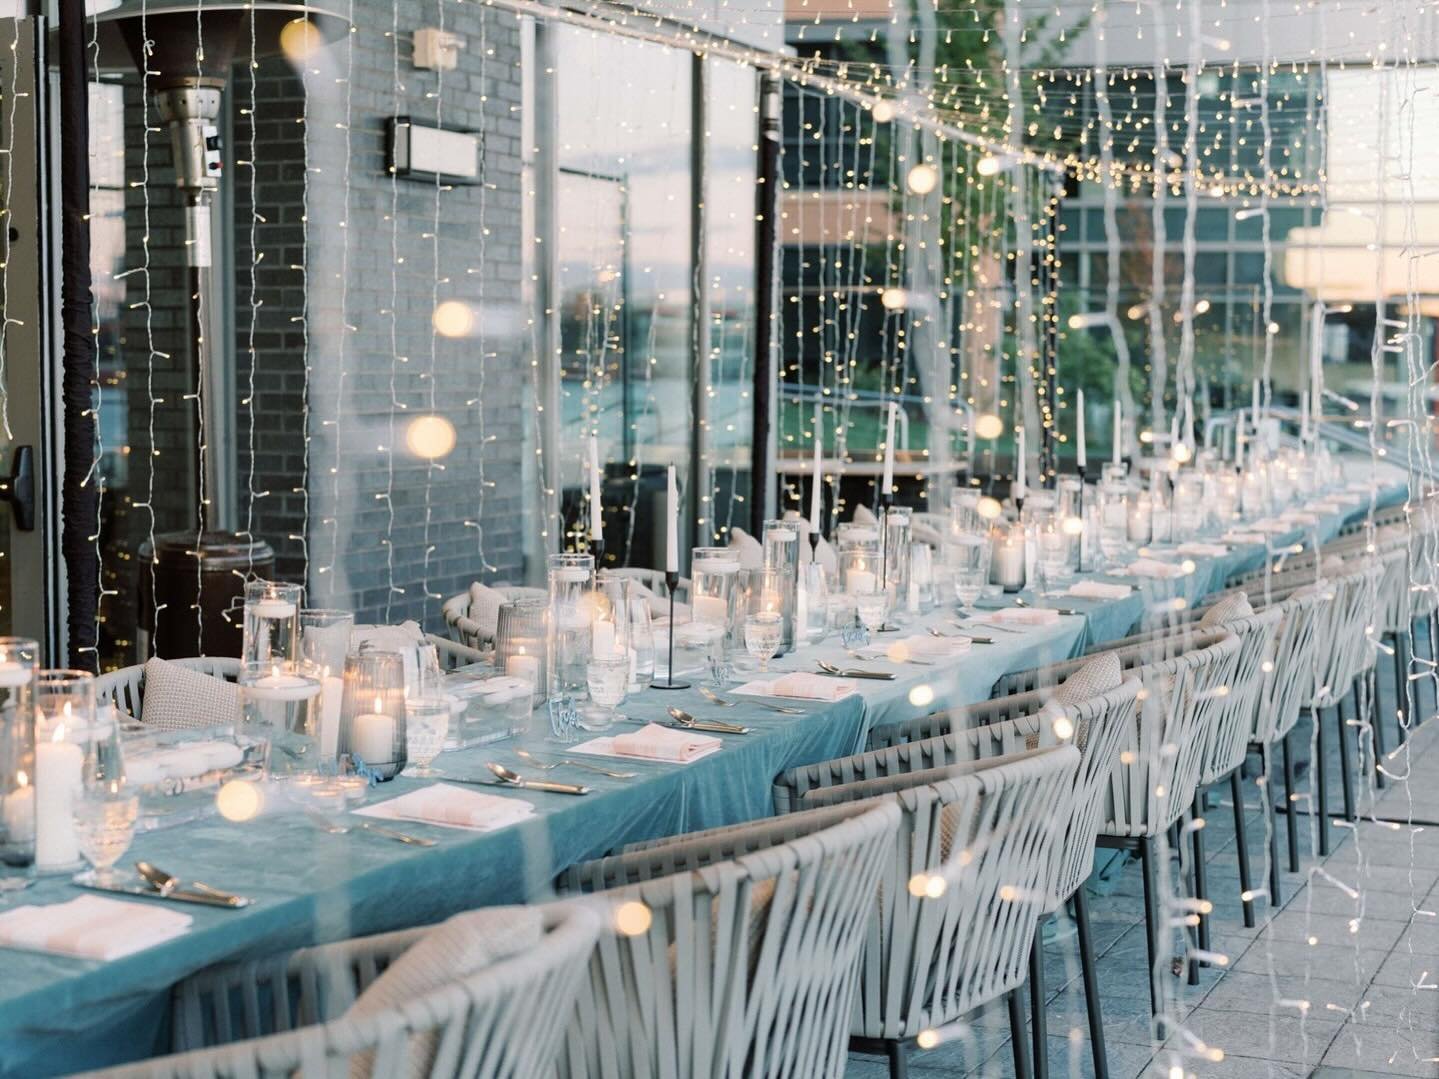 Event season is upon us! Make your next event extra special at @canopybaltimoreharborpoint 🎉 

Host your special day on the waterfront patio, the terrace with an incredible city view, or one of the spacious event spaces. You&rsquo;re sure to impress